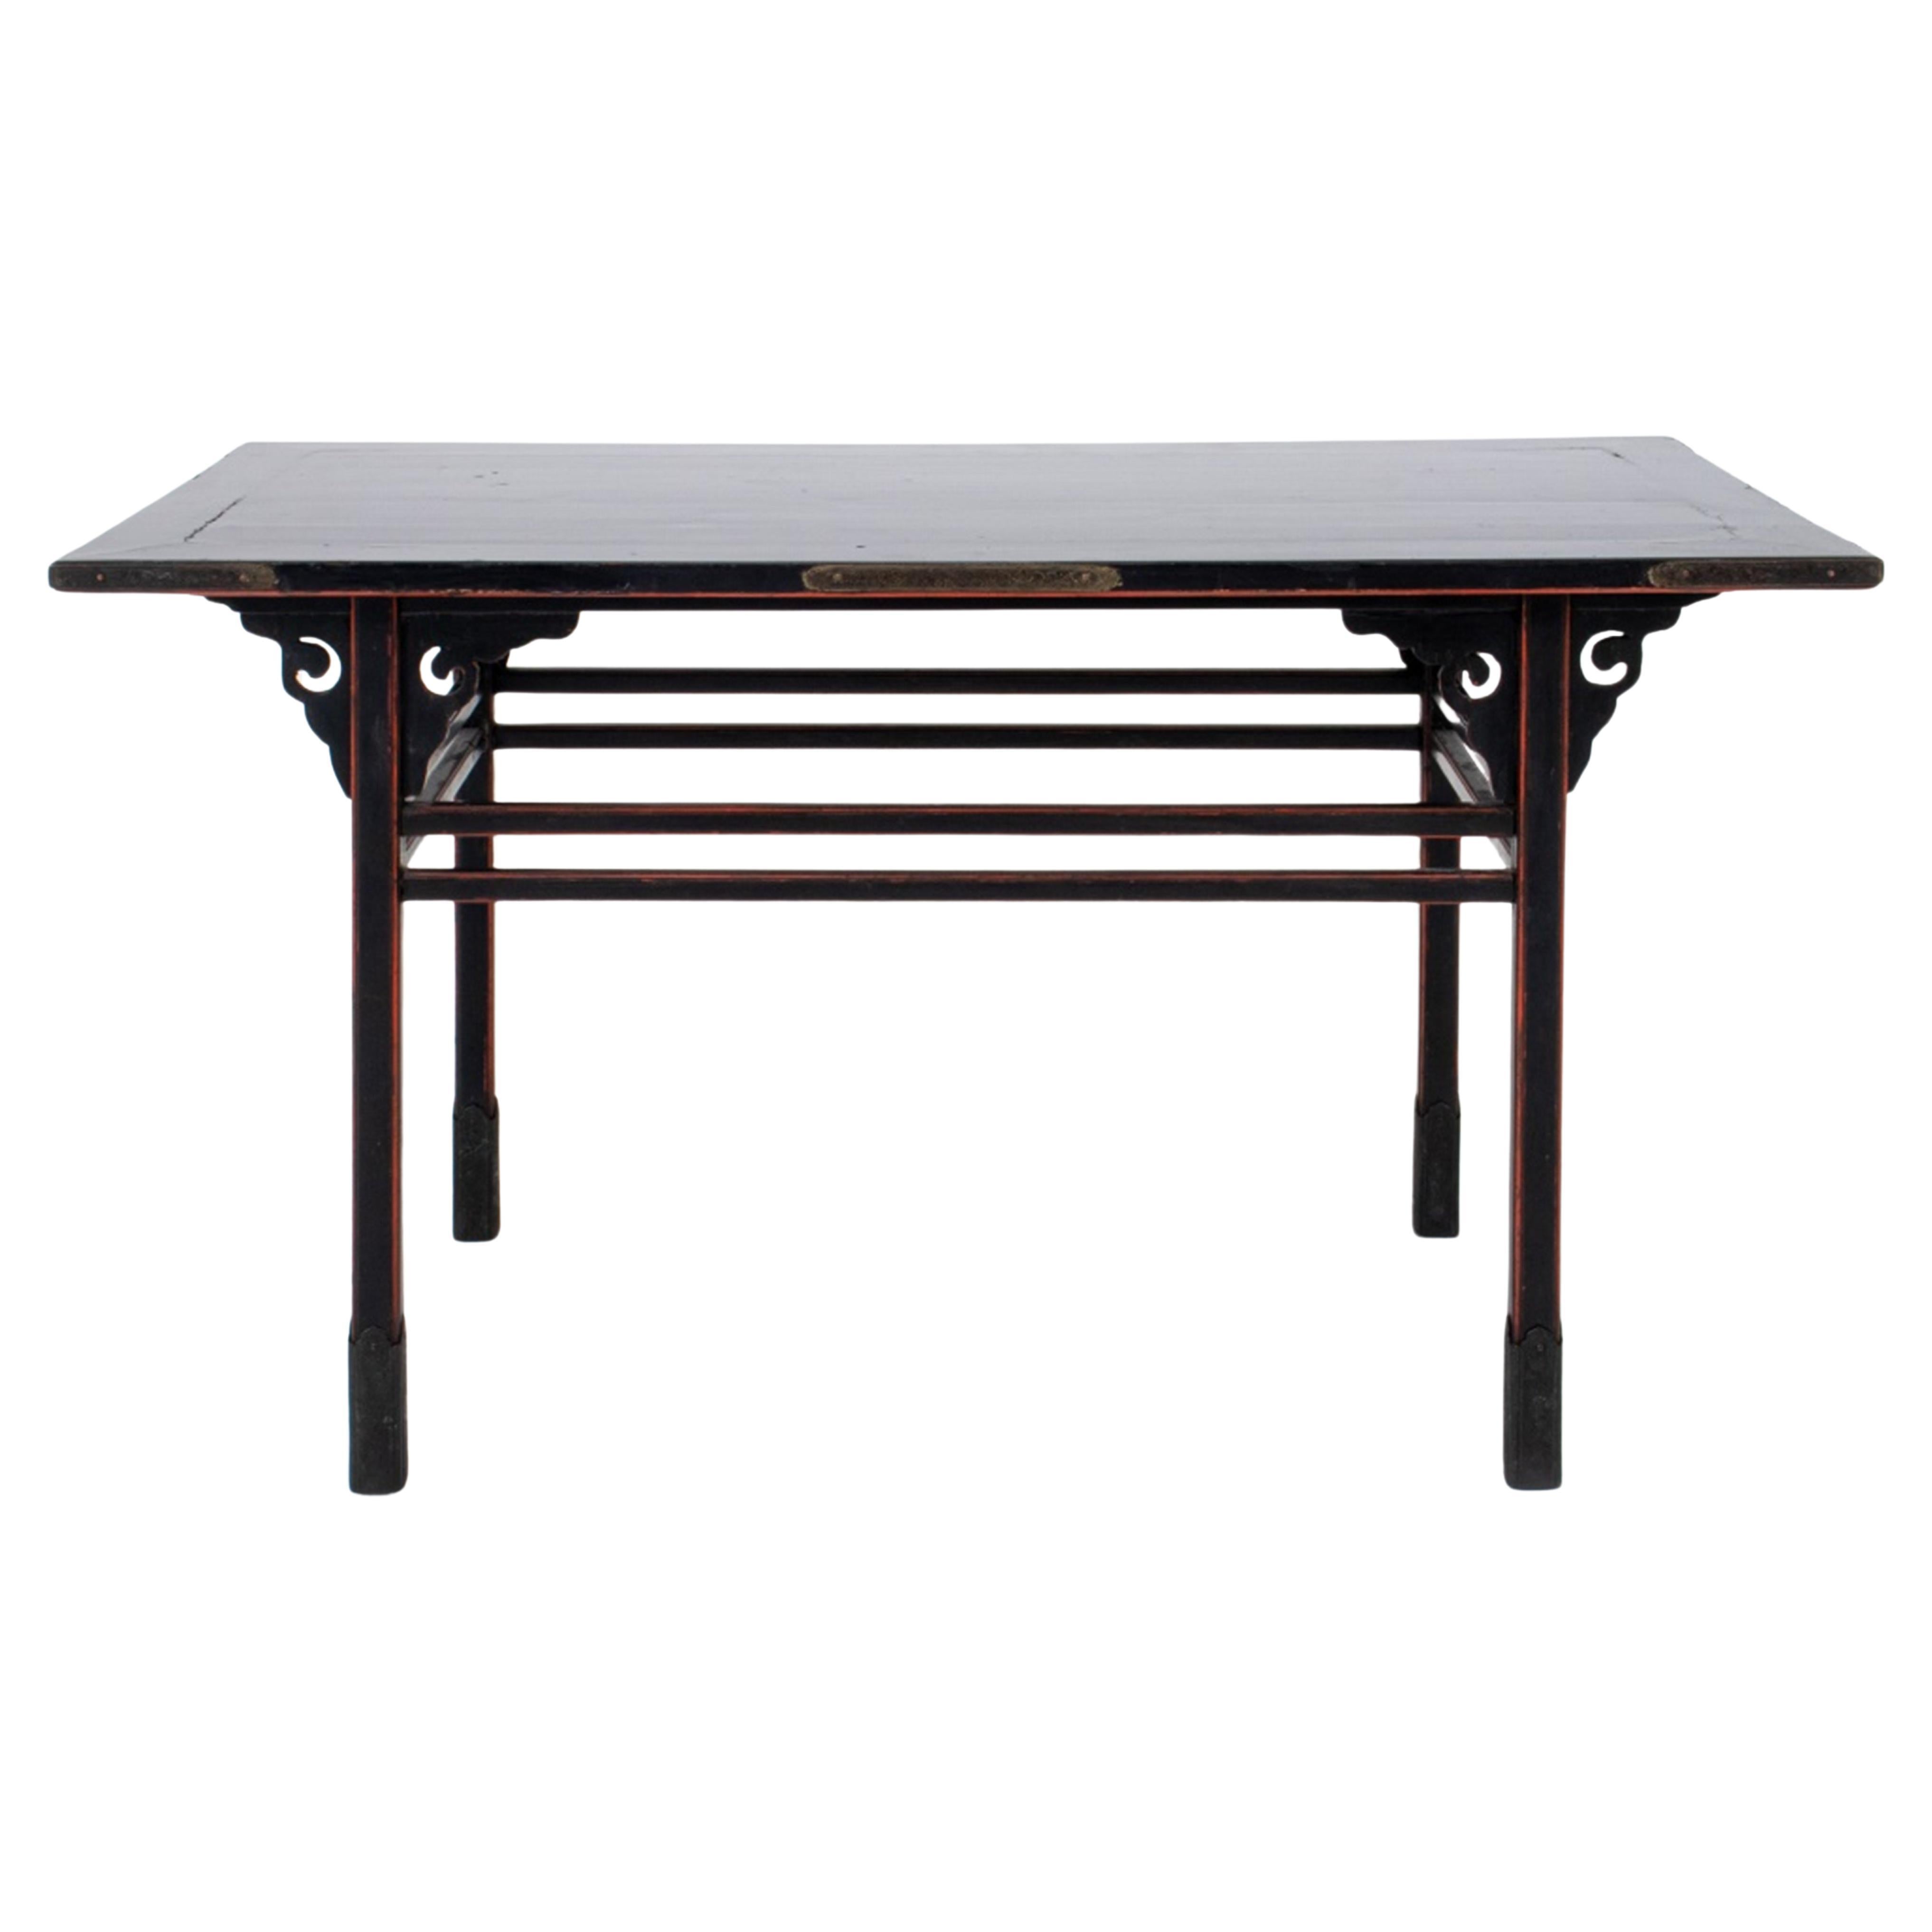 Japanese Black Lacquer Alter Table, 19th Century For Sale